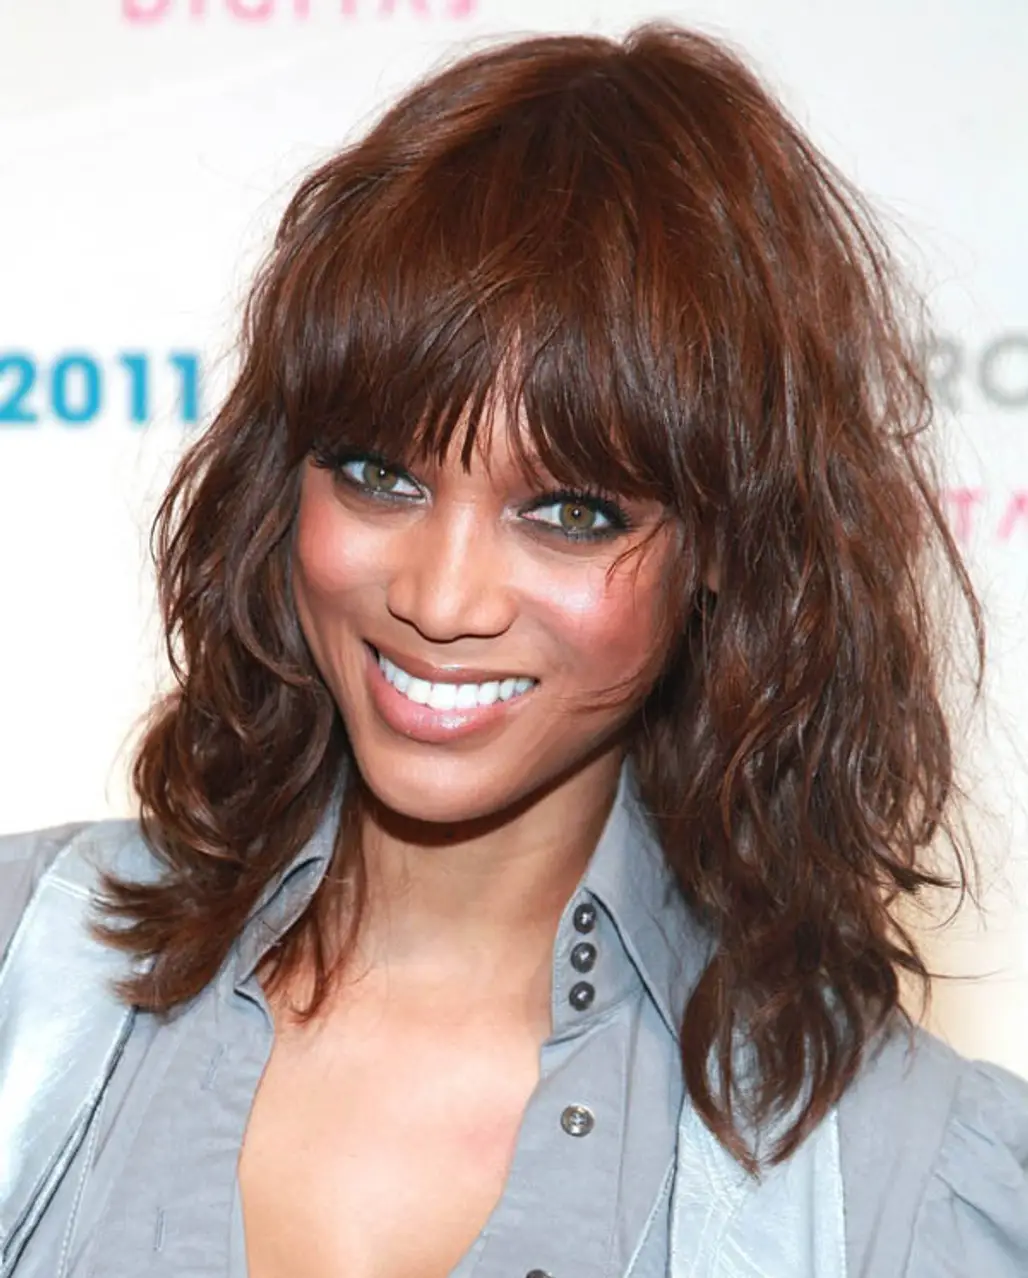 Tyra Banks’ Tousled Curls